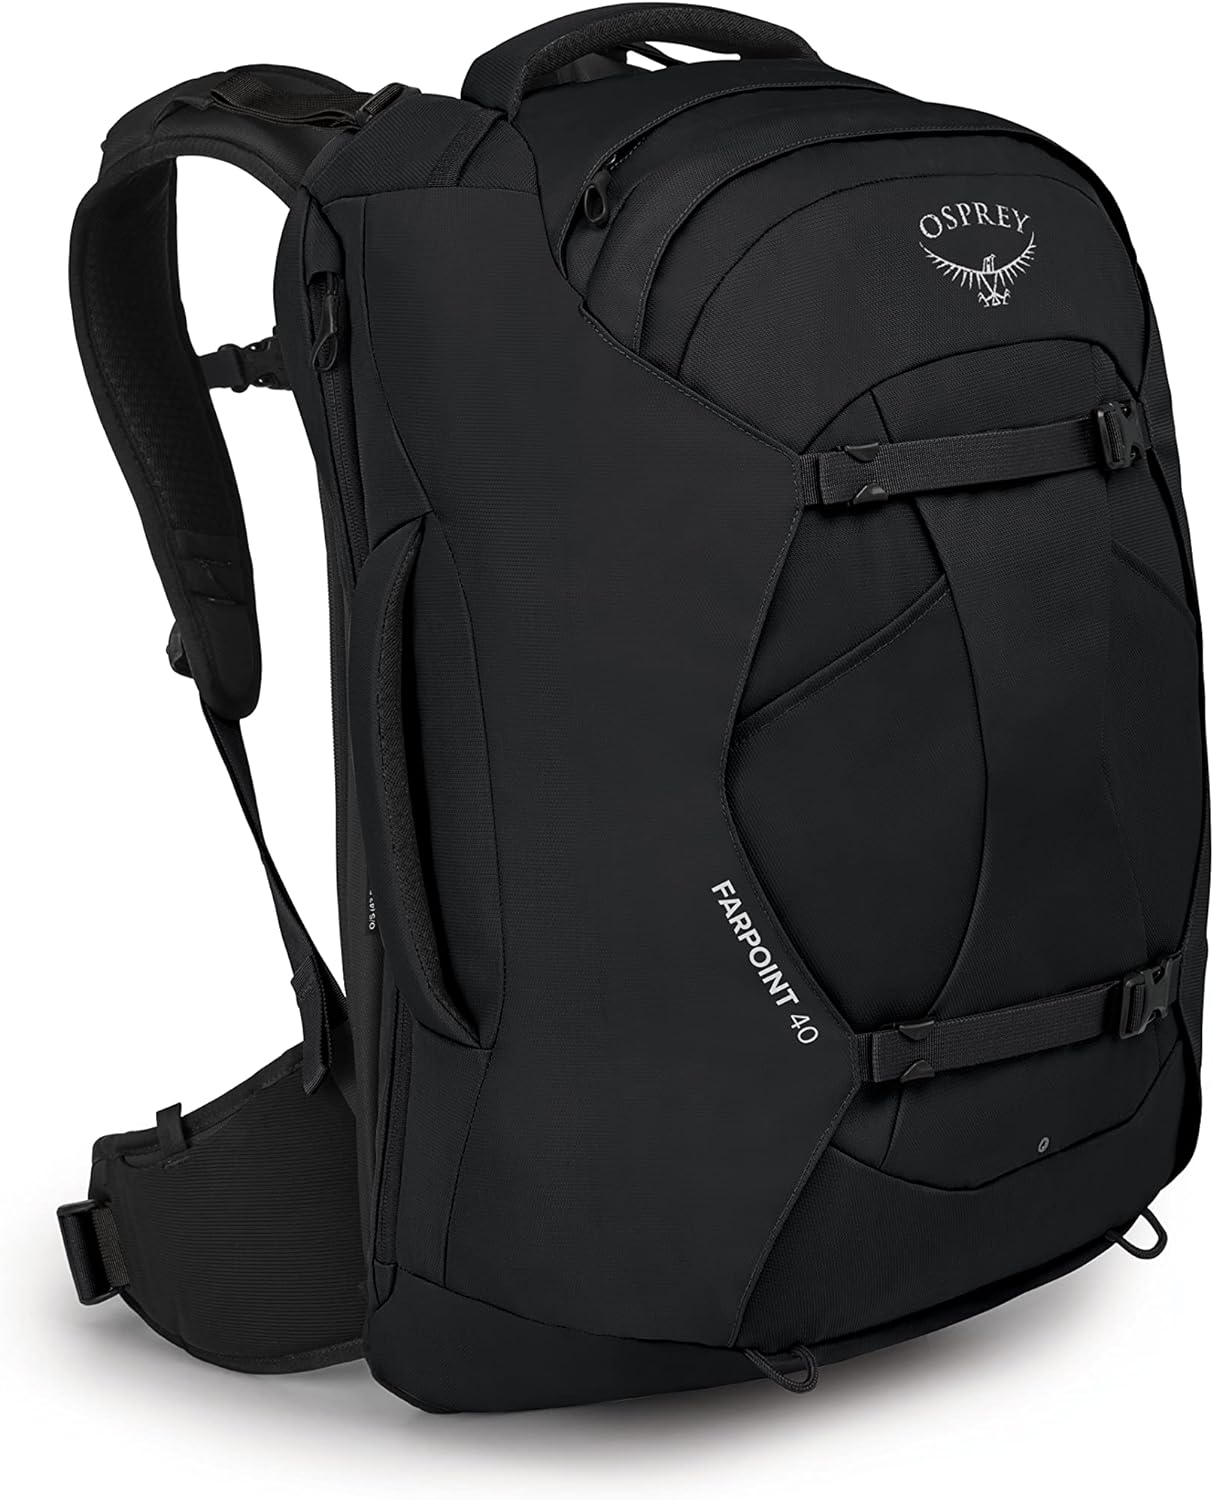 Osprey Farpoint 40L Men's Travel Backpack, Black- pack in one day